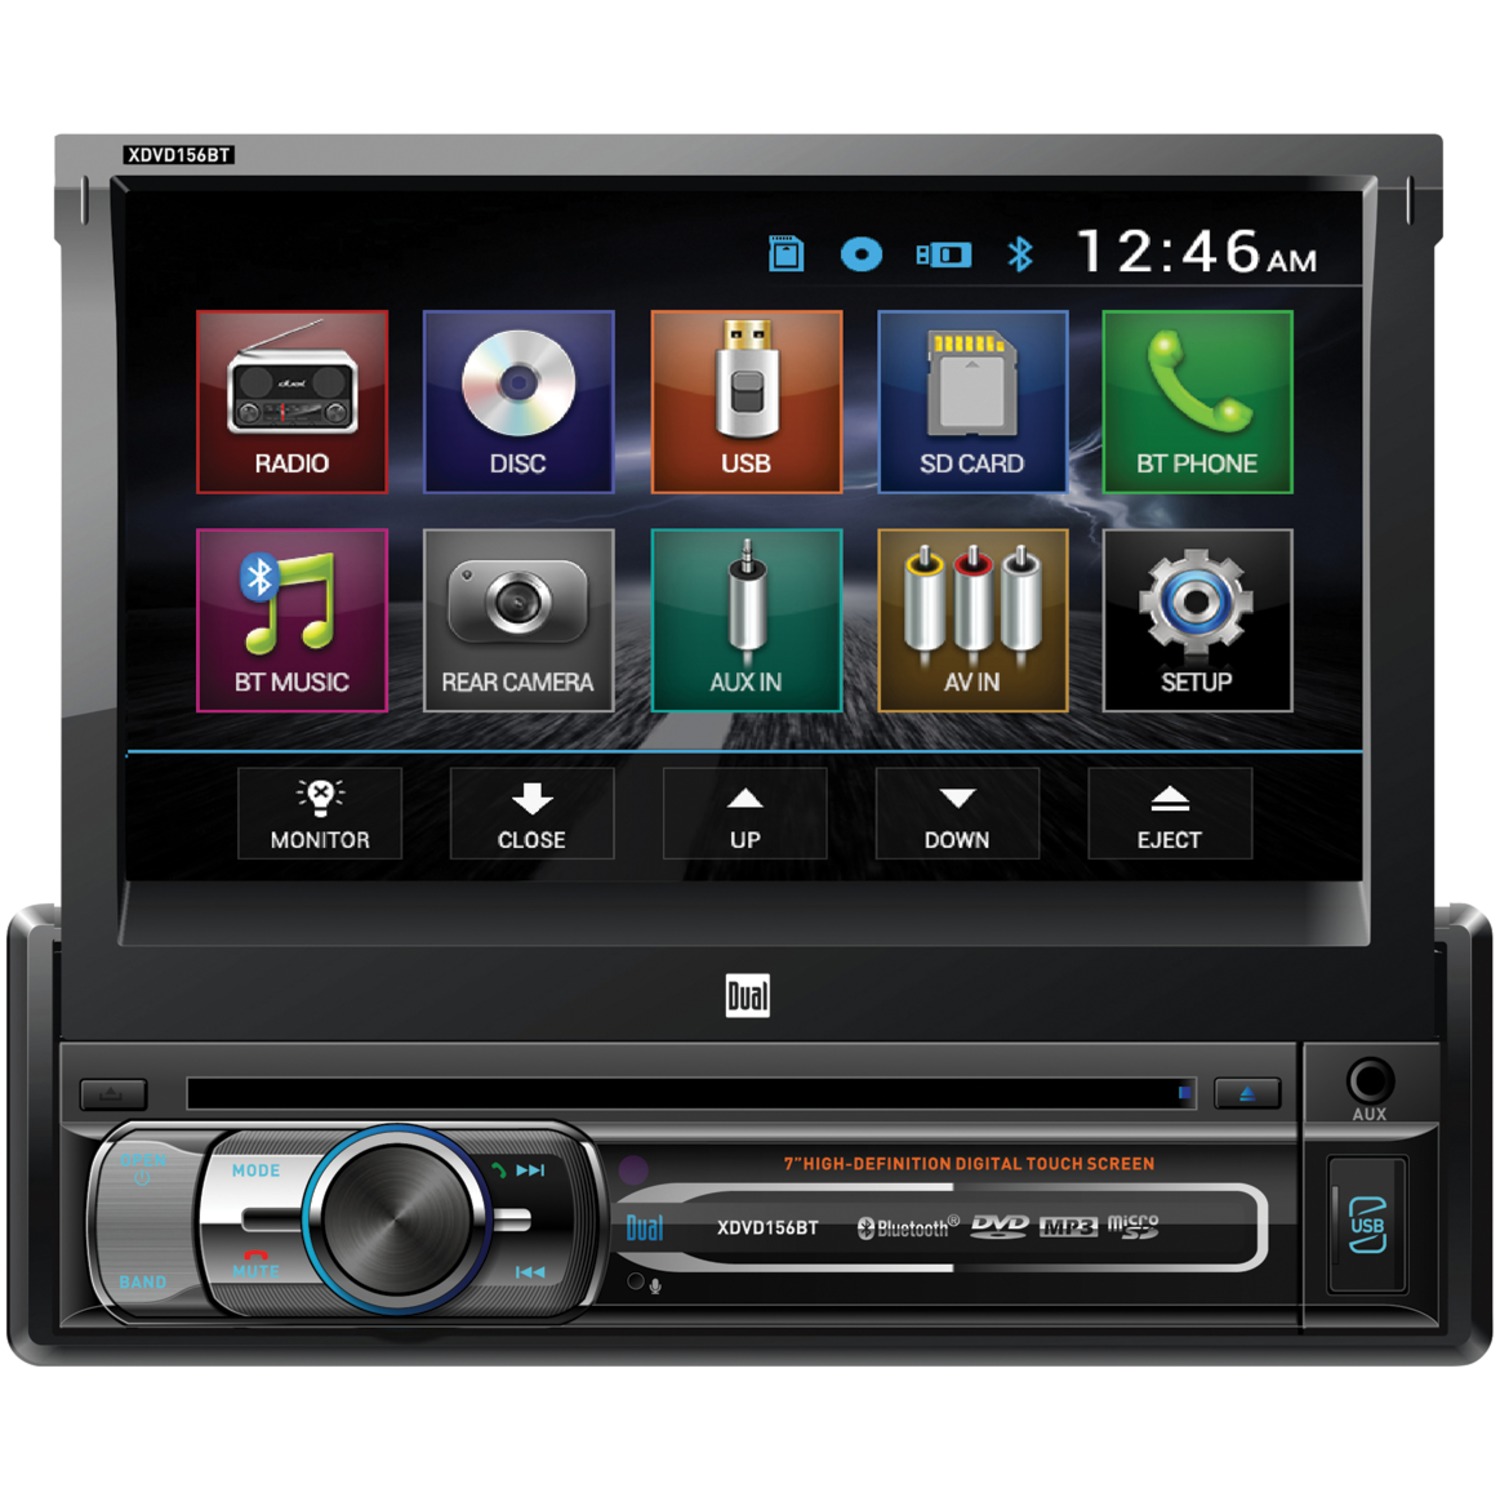 Dual XDVD156BT 7" Single-Din DVD Receiver with Motorized Touchscreen, New - image 1 of 4